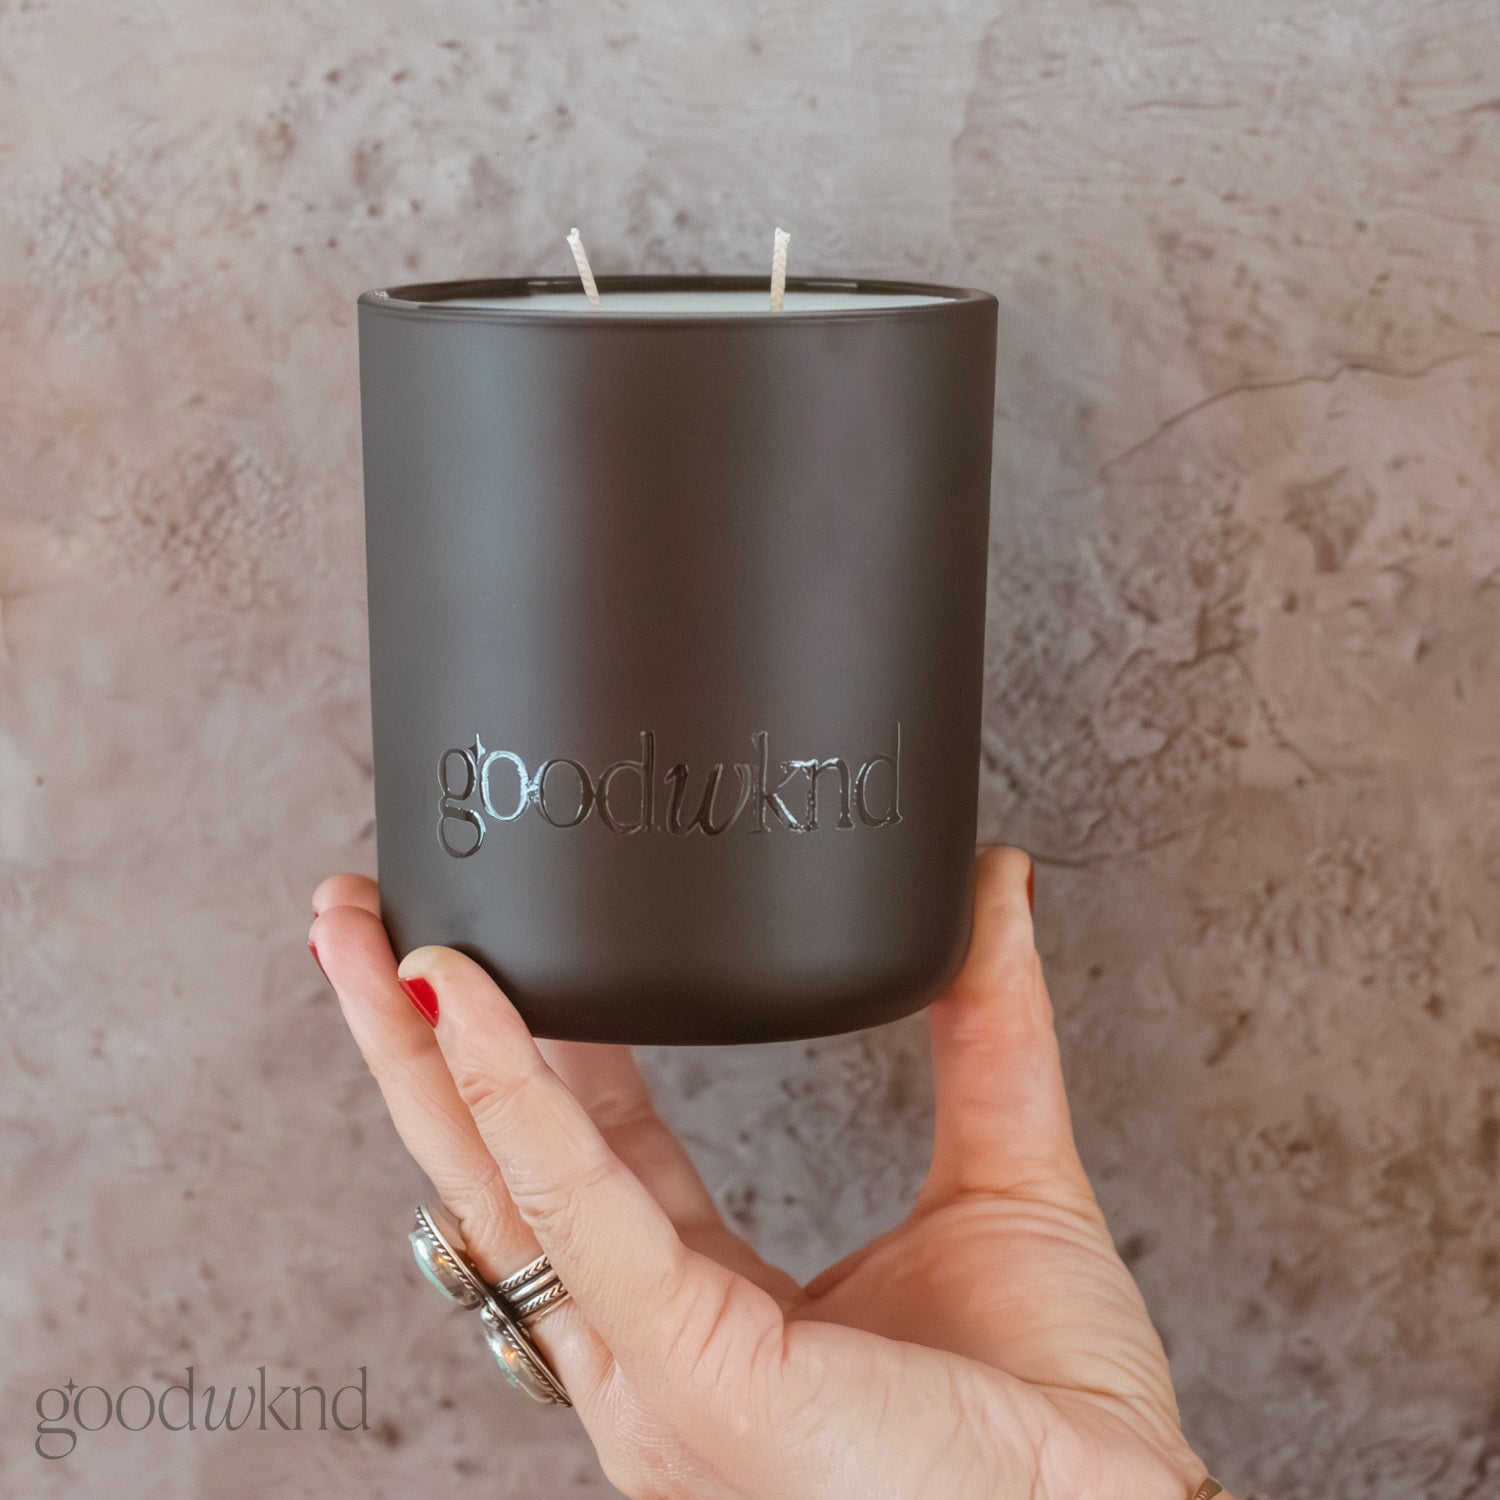 Valet Hussy Candle